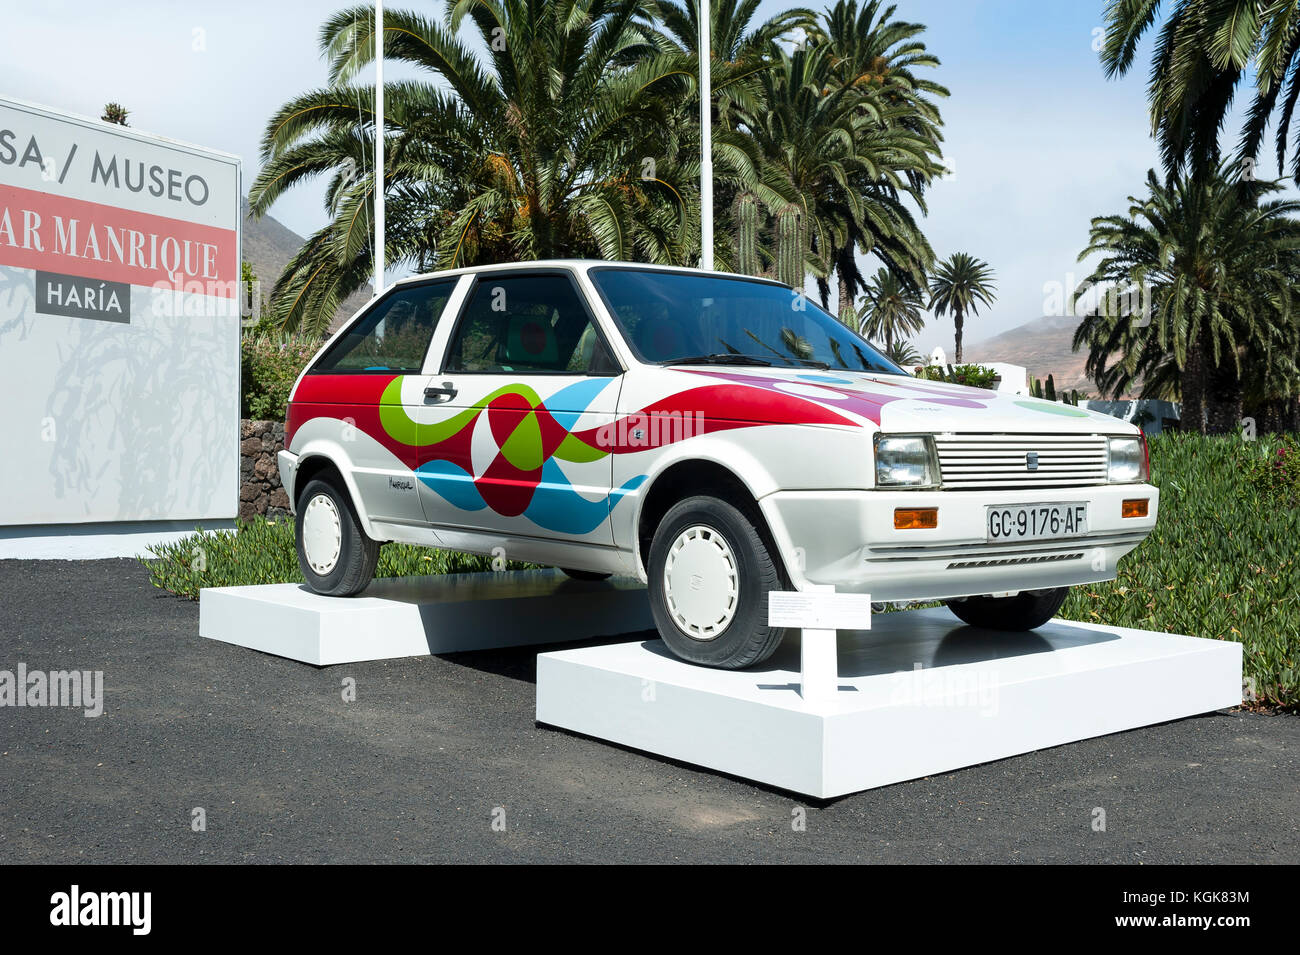 Seat Ibiza painted by Cesar Manrique, Cesar Manrique House and Museaum, Haria, Lanzarote, Canary Islands, Spain Stock Photo